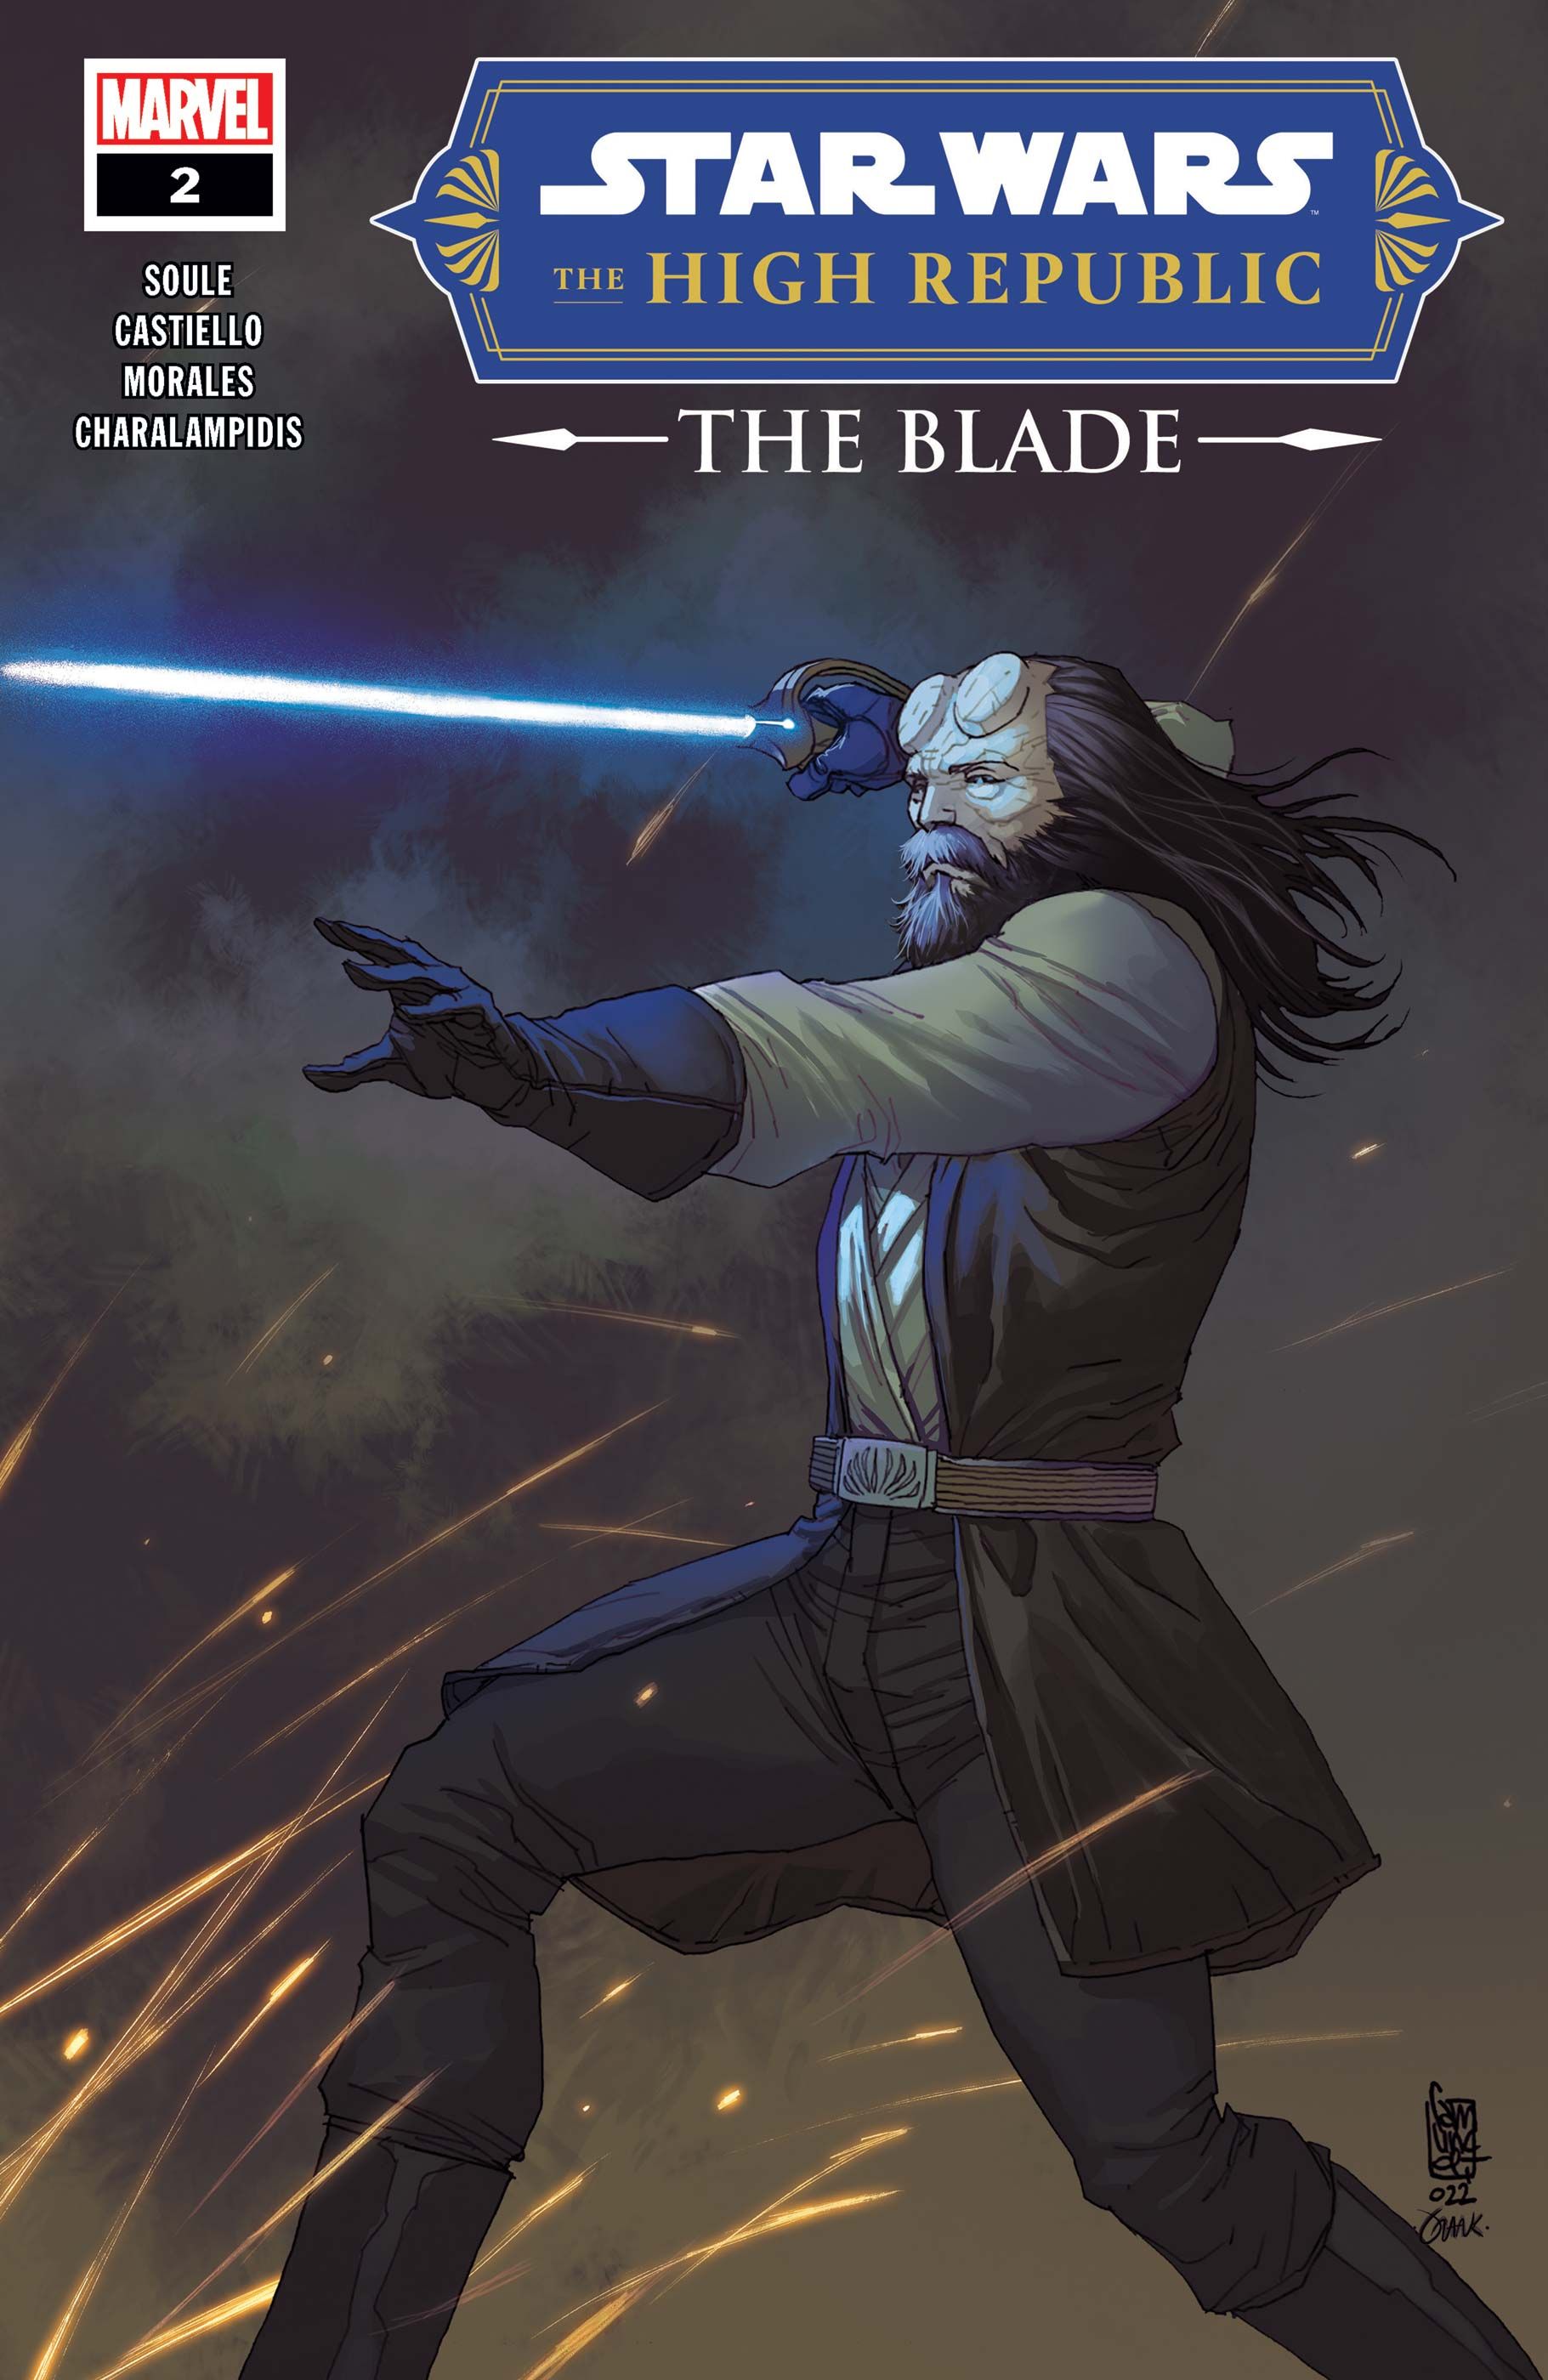 Star Wars High Republic The Blade 2 cover art by Giuseppe Camuncoli and Frank Martin